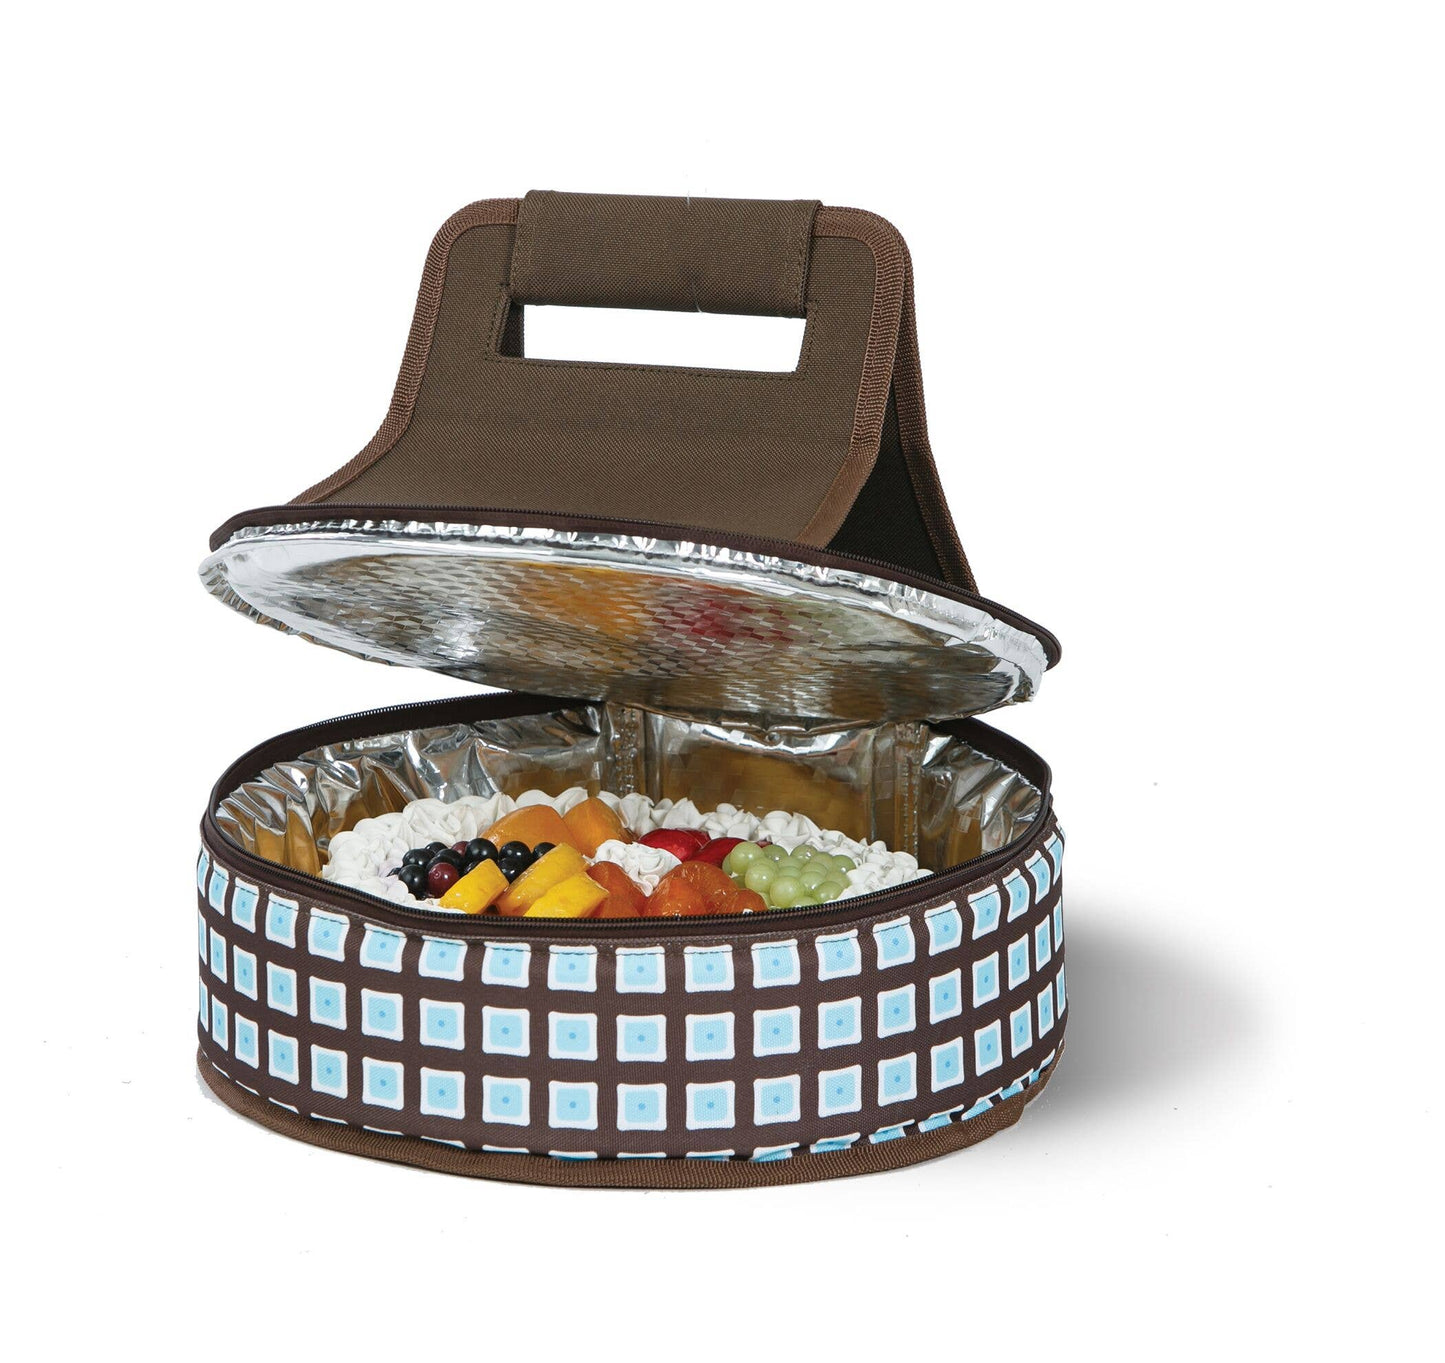 CakeNCarry Round Insulated Carrier for Desserts & Appetizers